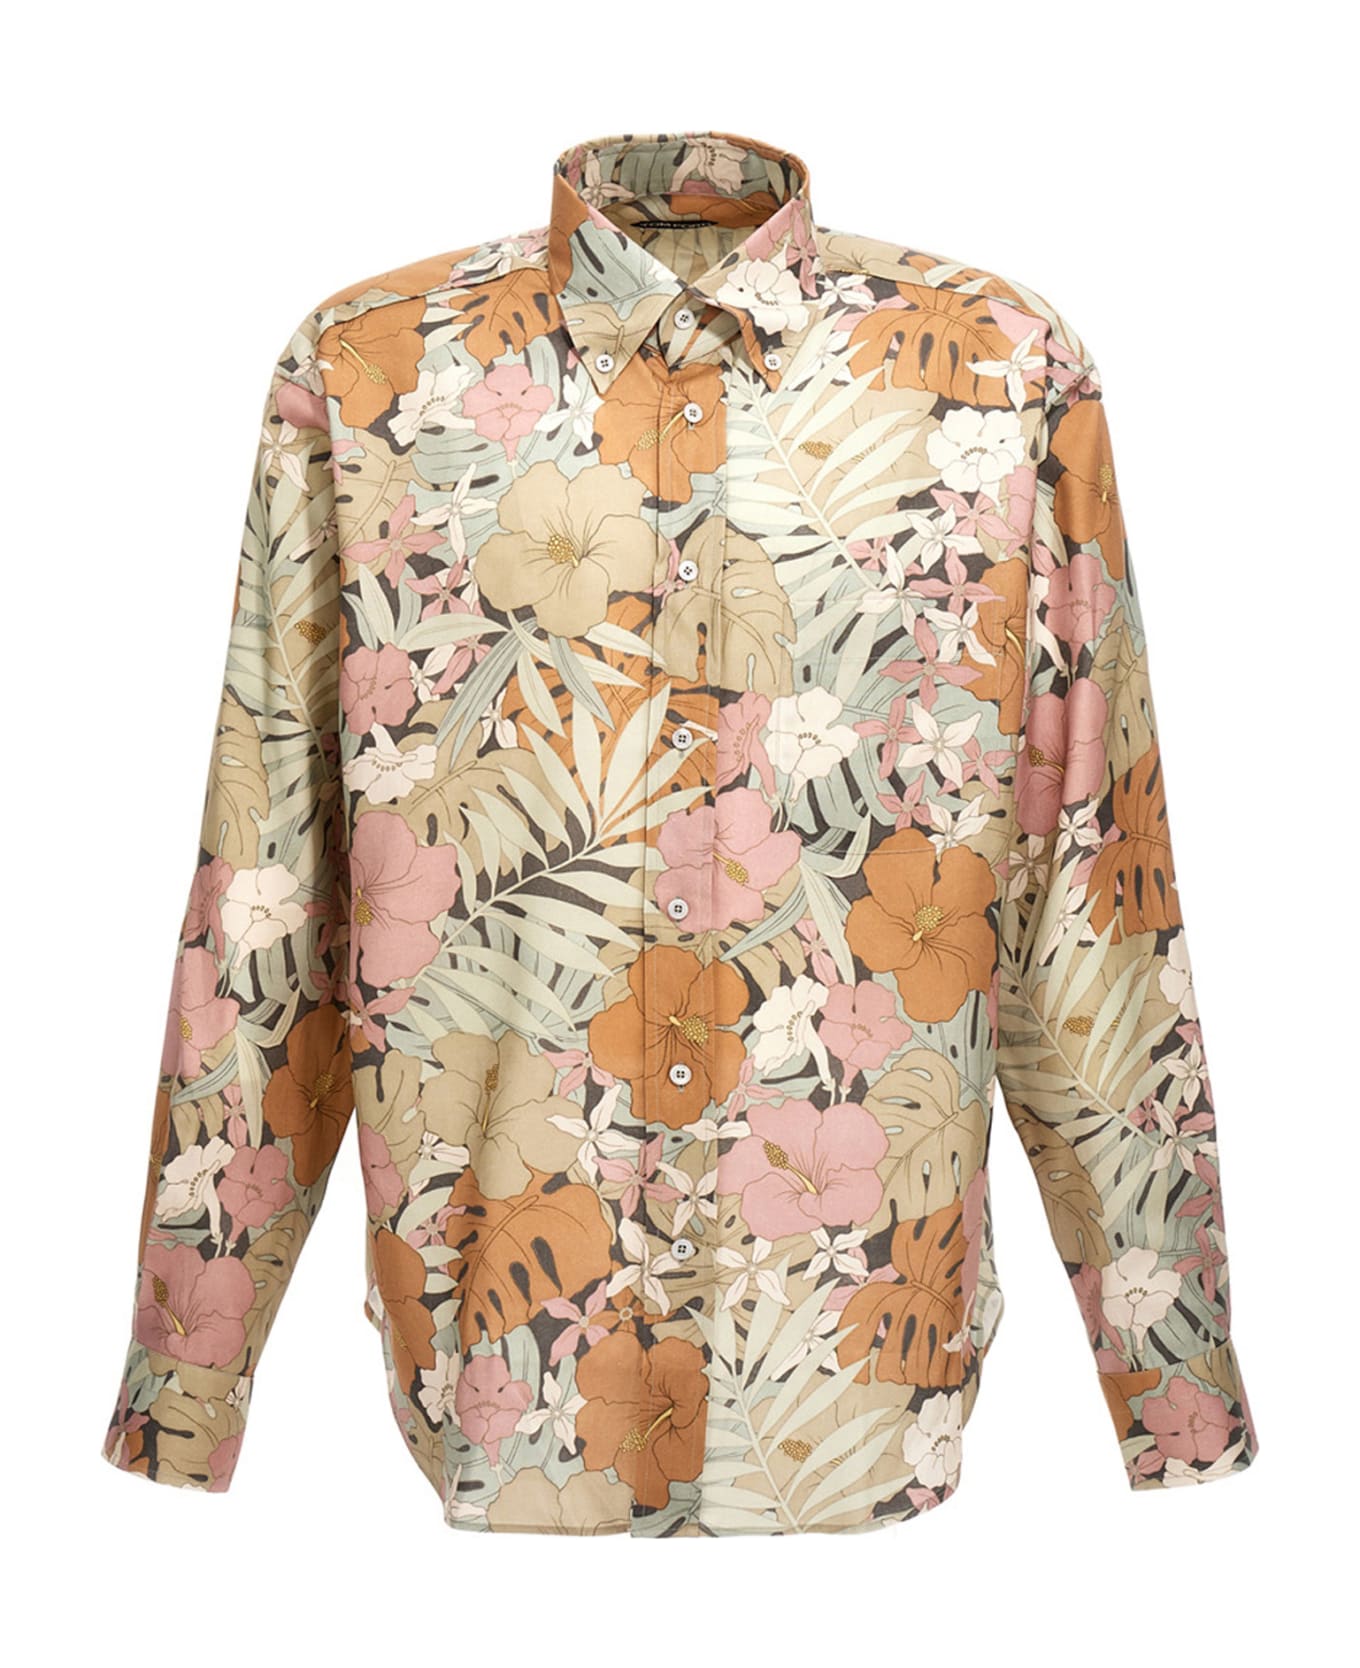 Tom Ford Floral Shirt - Red